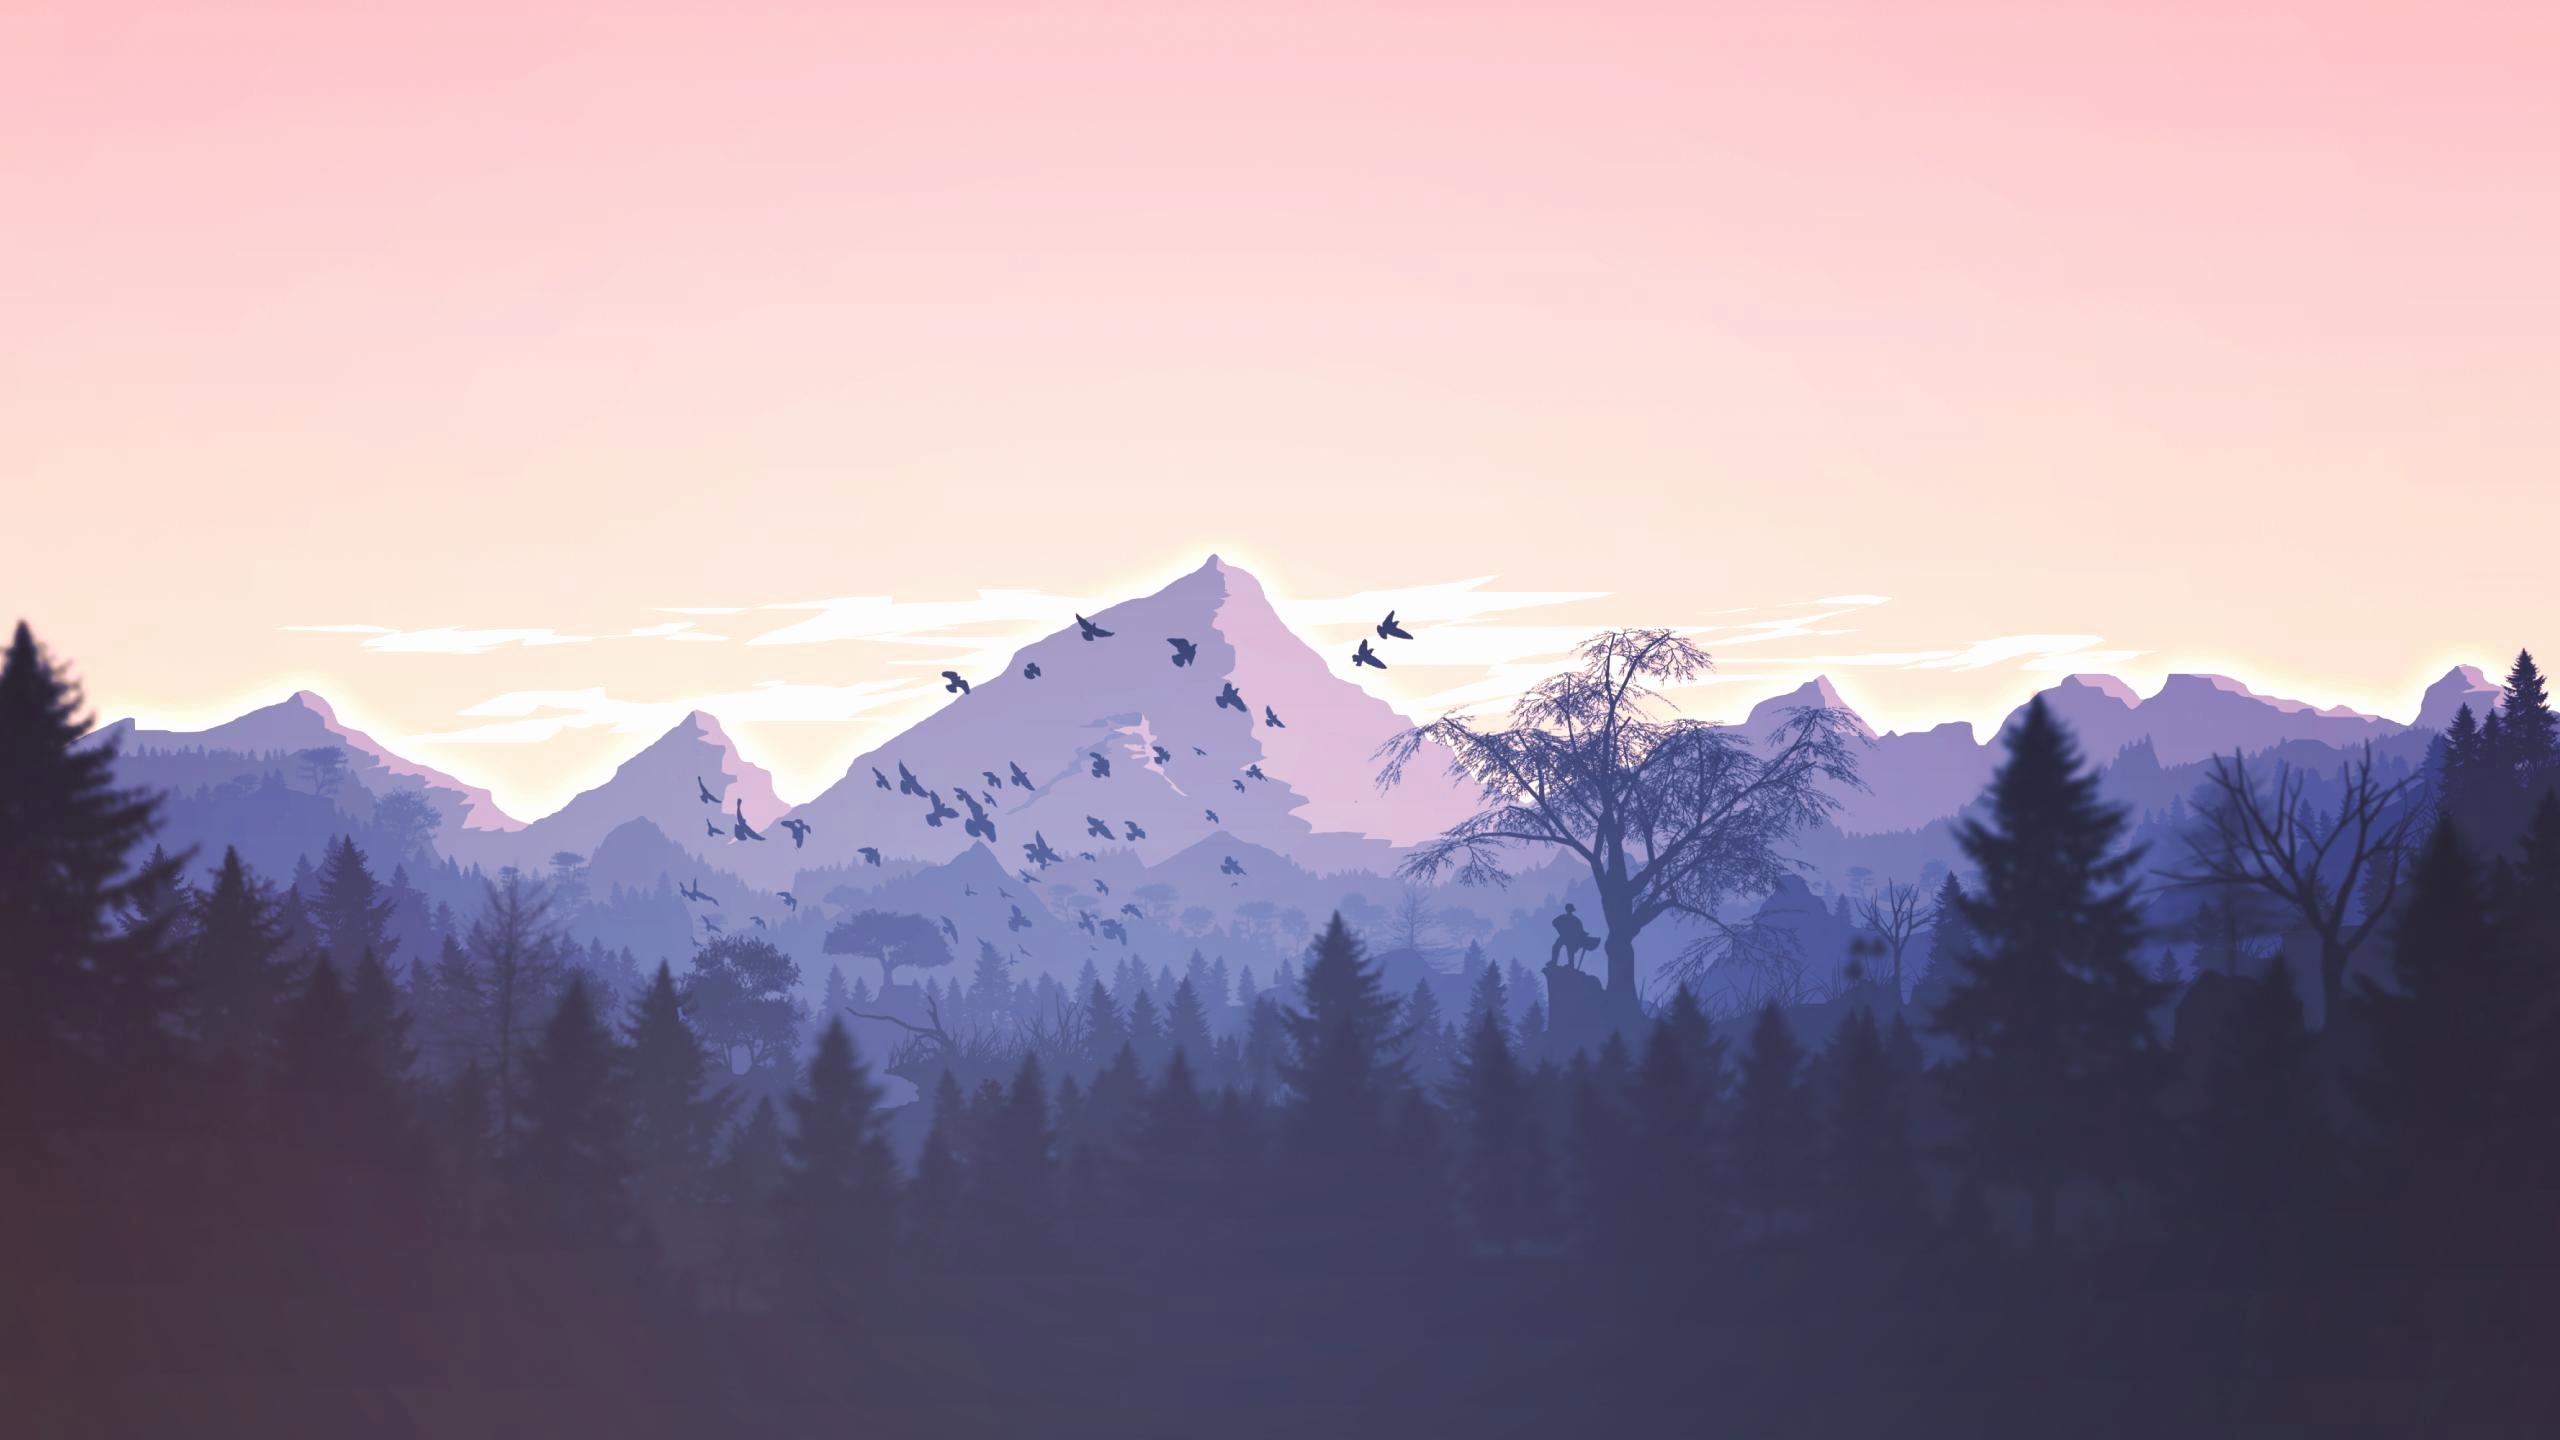 Minimalist Mountain Wallpaper HD Inspirational Minimalism Birds Mountains Trees forest HD Artist 4k Wallpaper Background S Of the Day of The Hudson